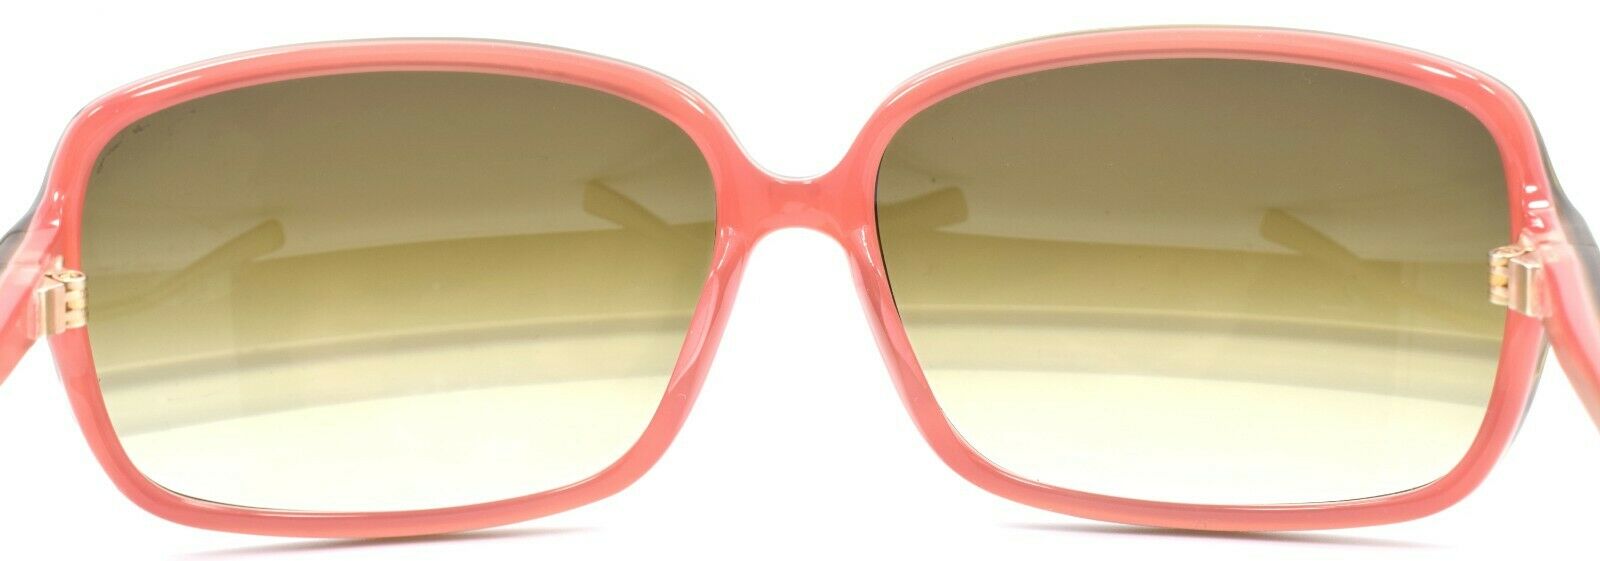 5-Oliver Peoples Bacall OTPI Women's Sunglasses Brown Over Pink / Green JAPAN-Does not apply-IKSpecs